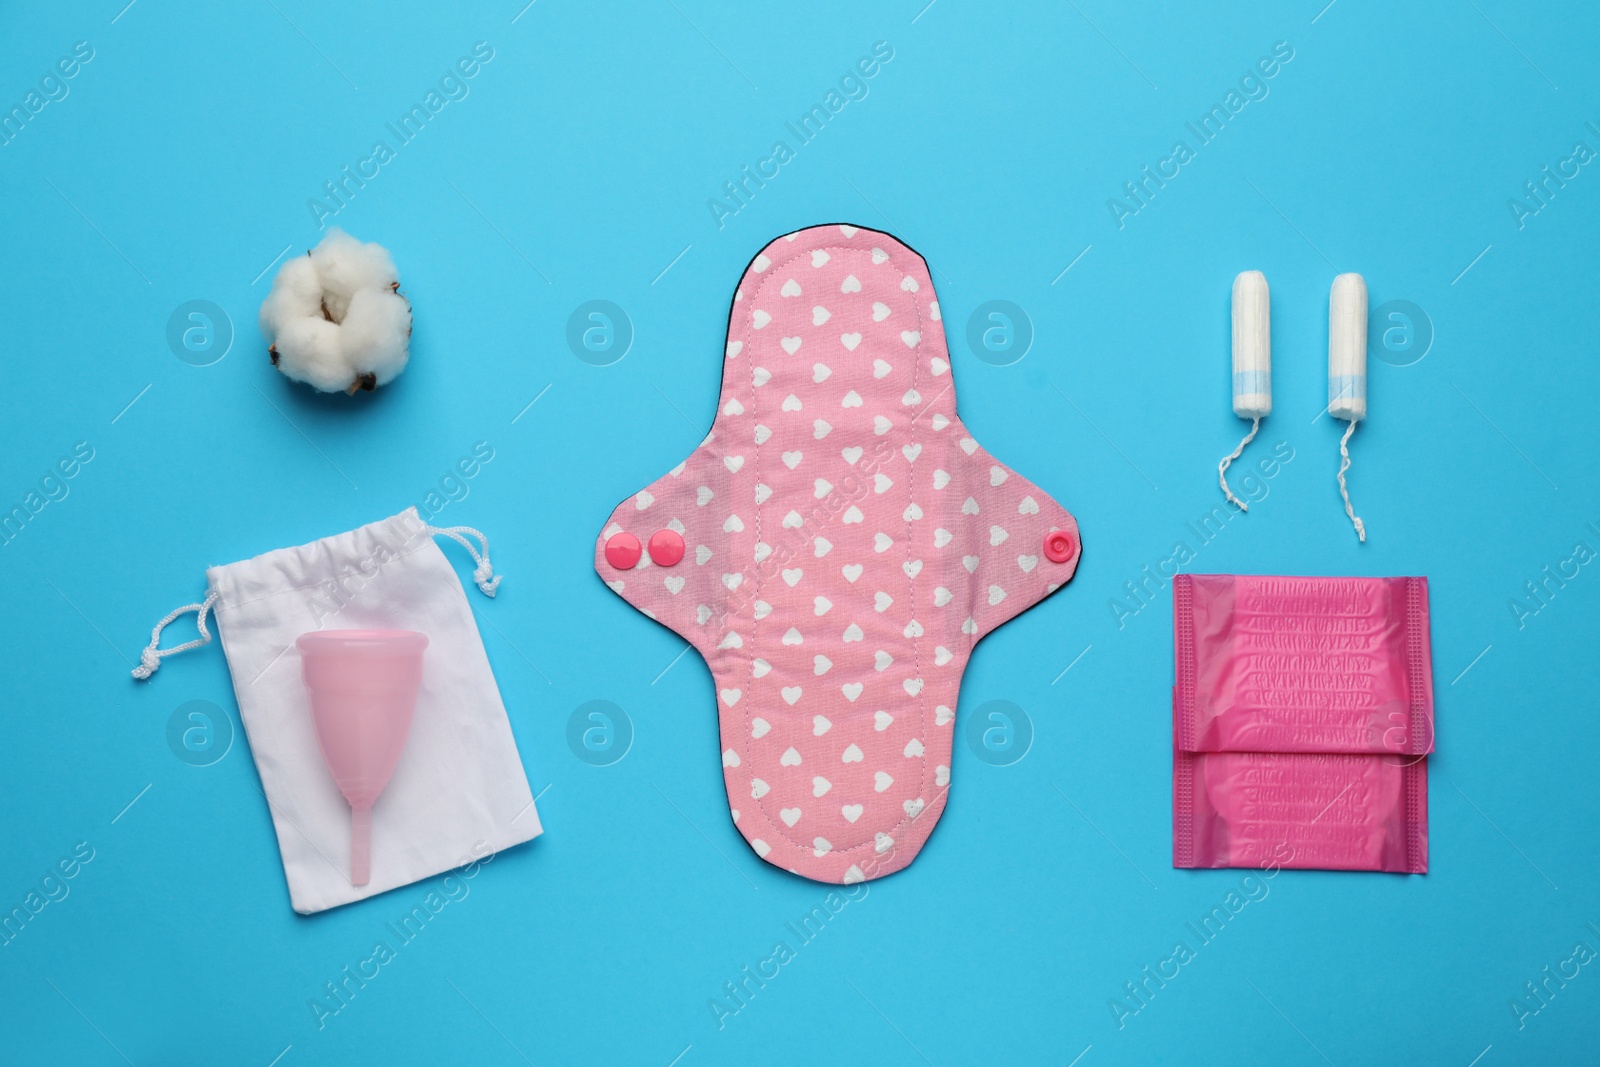 Photo of Cloth menstrual pad near other reusable and disposable female hygiene products on light blue background, flat lay